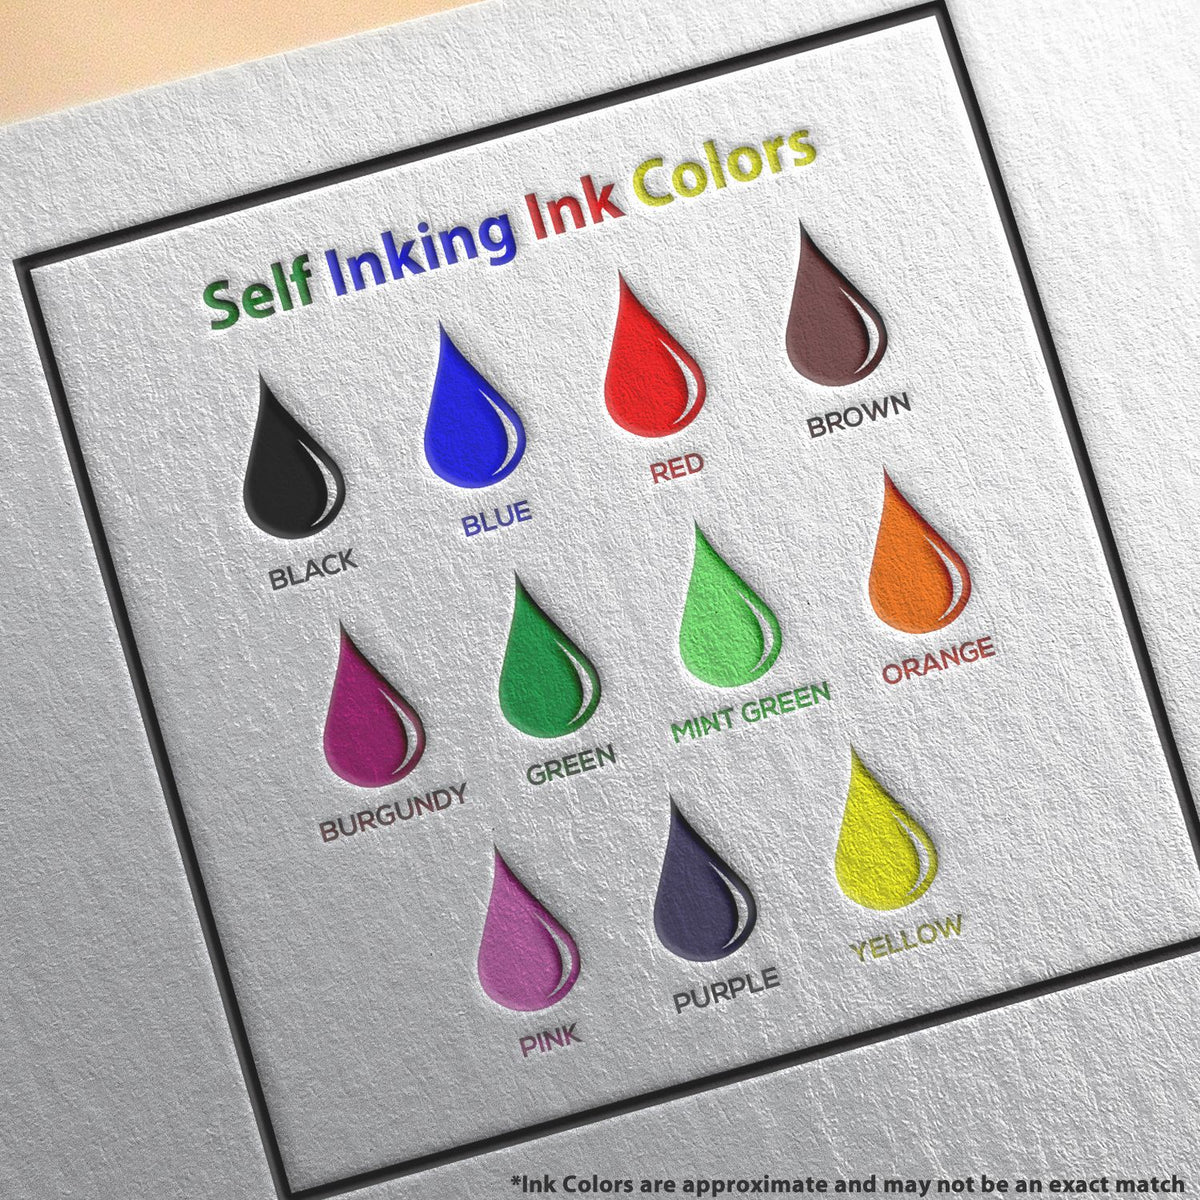 A picture showing the different ink colors or hues available for the Self-Inking New Jersey Landscape Architect Stamp product.